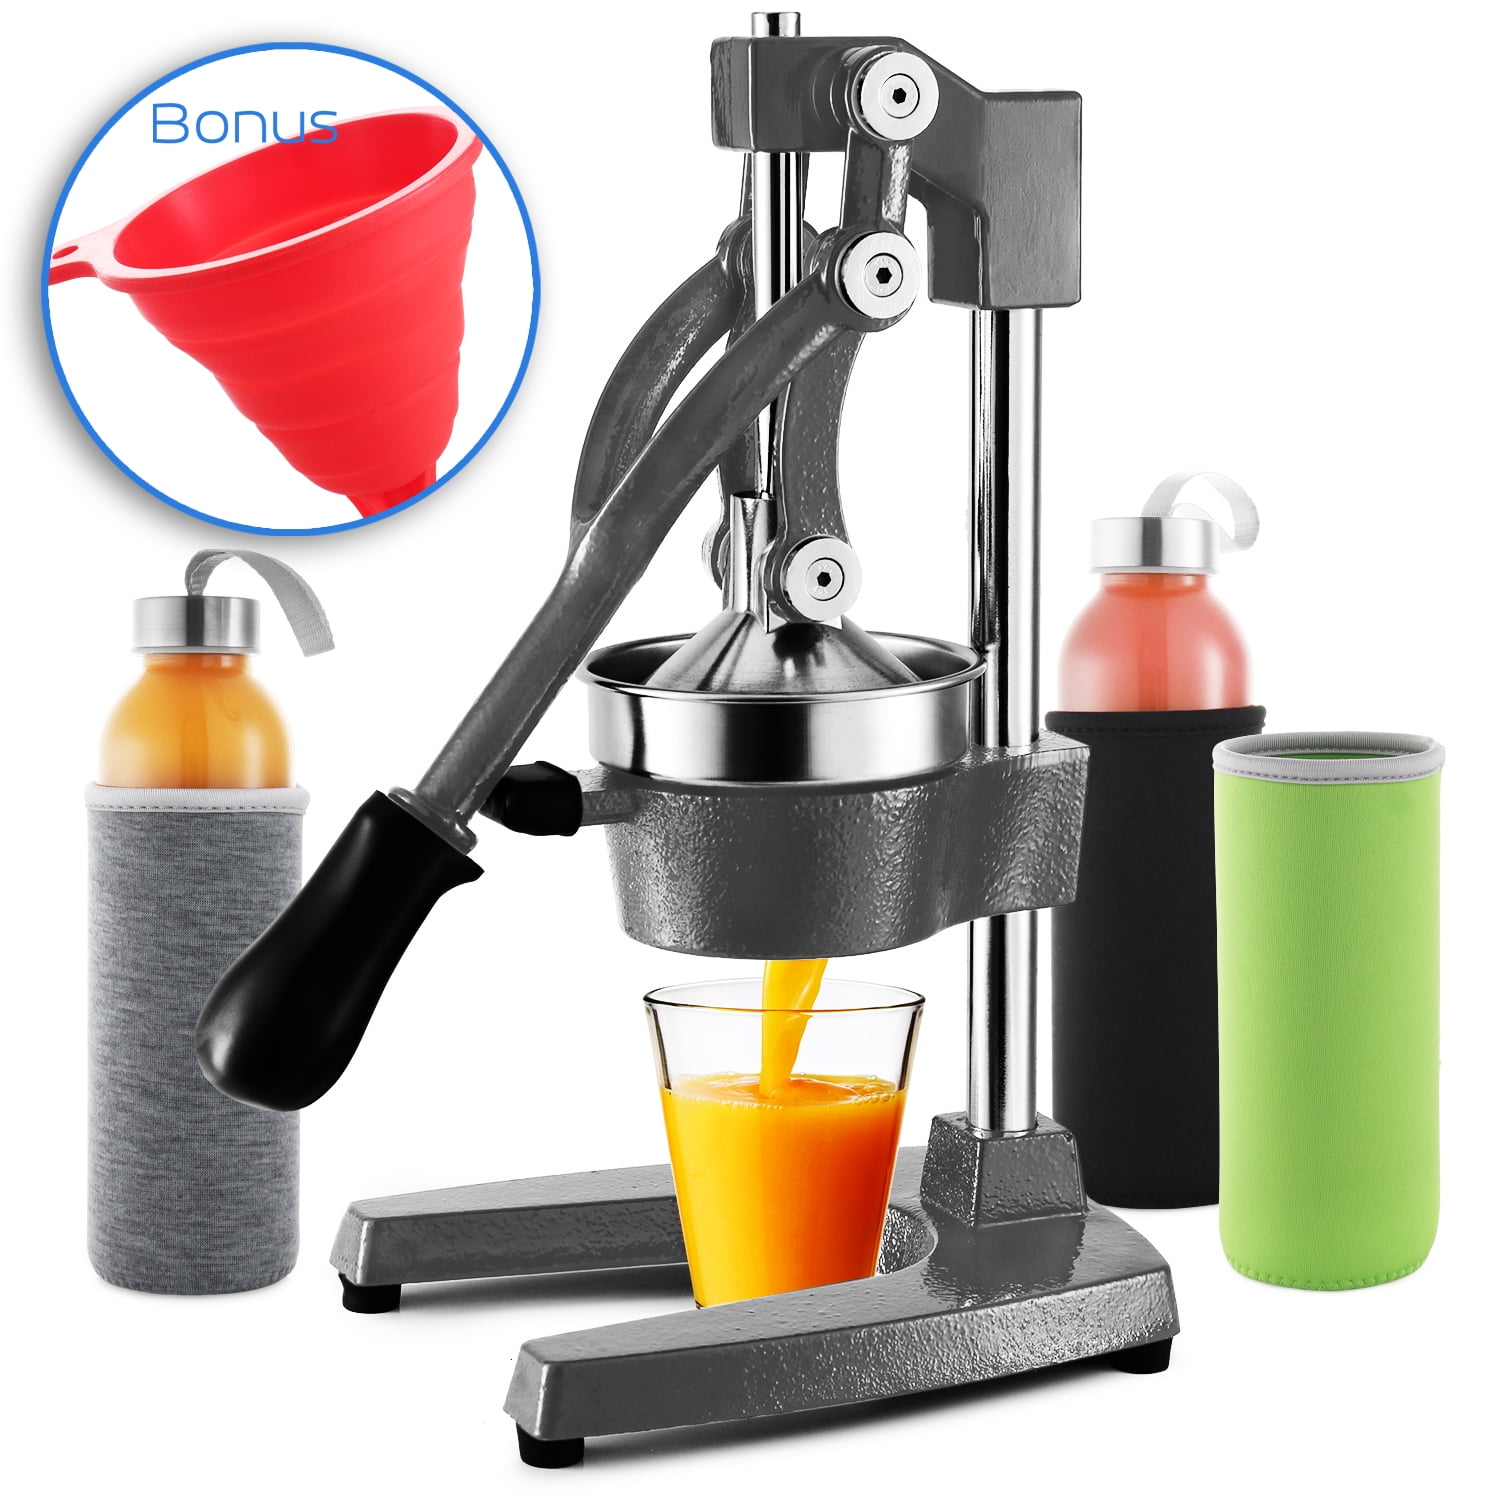 Stainless Steel Electric Juicer Machine - 160W Power Juice Press, Citrus  Juicer & Squeezer Masticating Machine - Easy to Clean - Includes Handle 